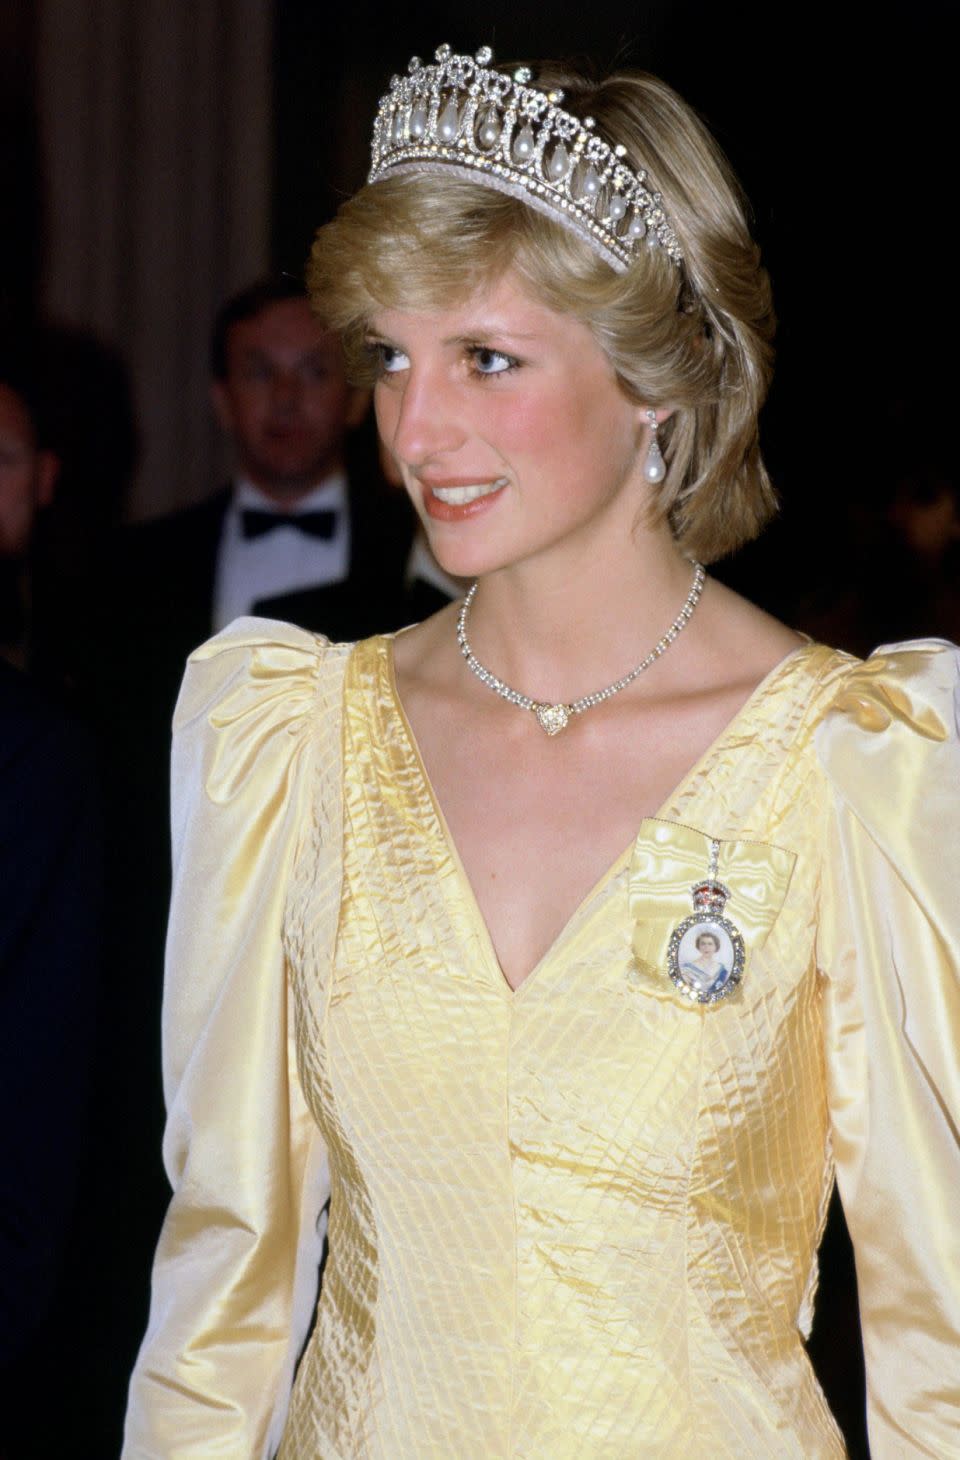 Diana's own mum left when she was just six. Photo: Getty